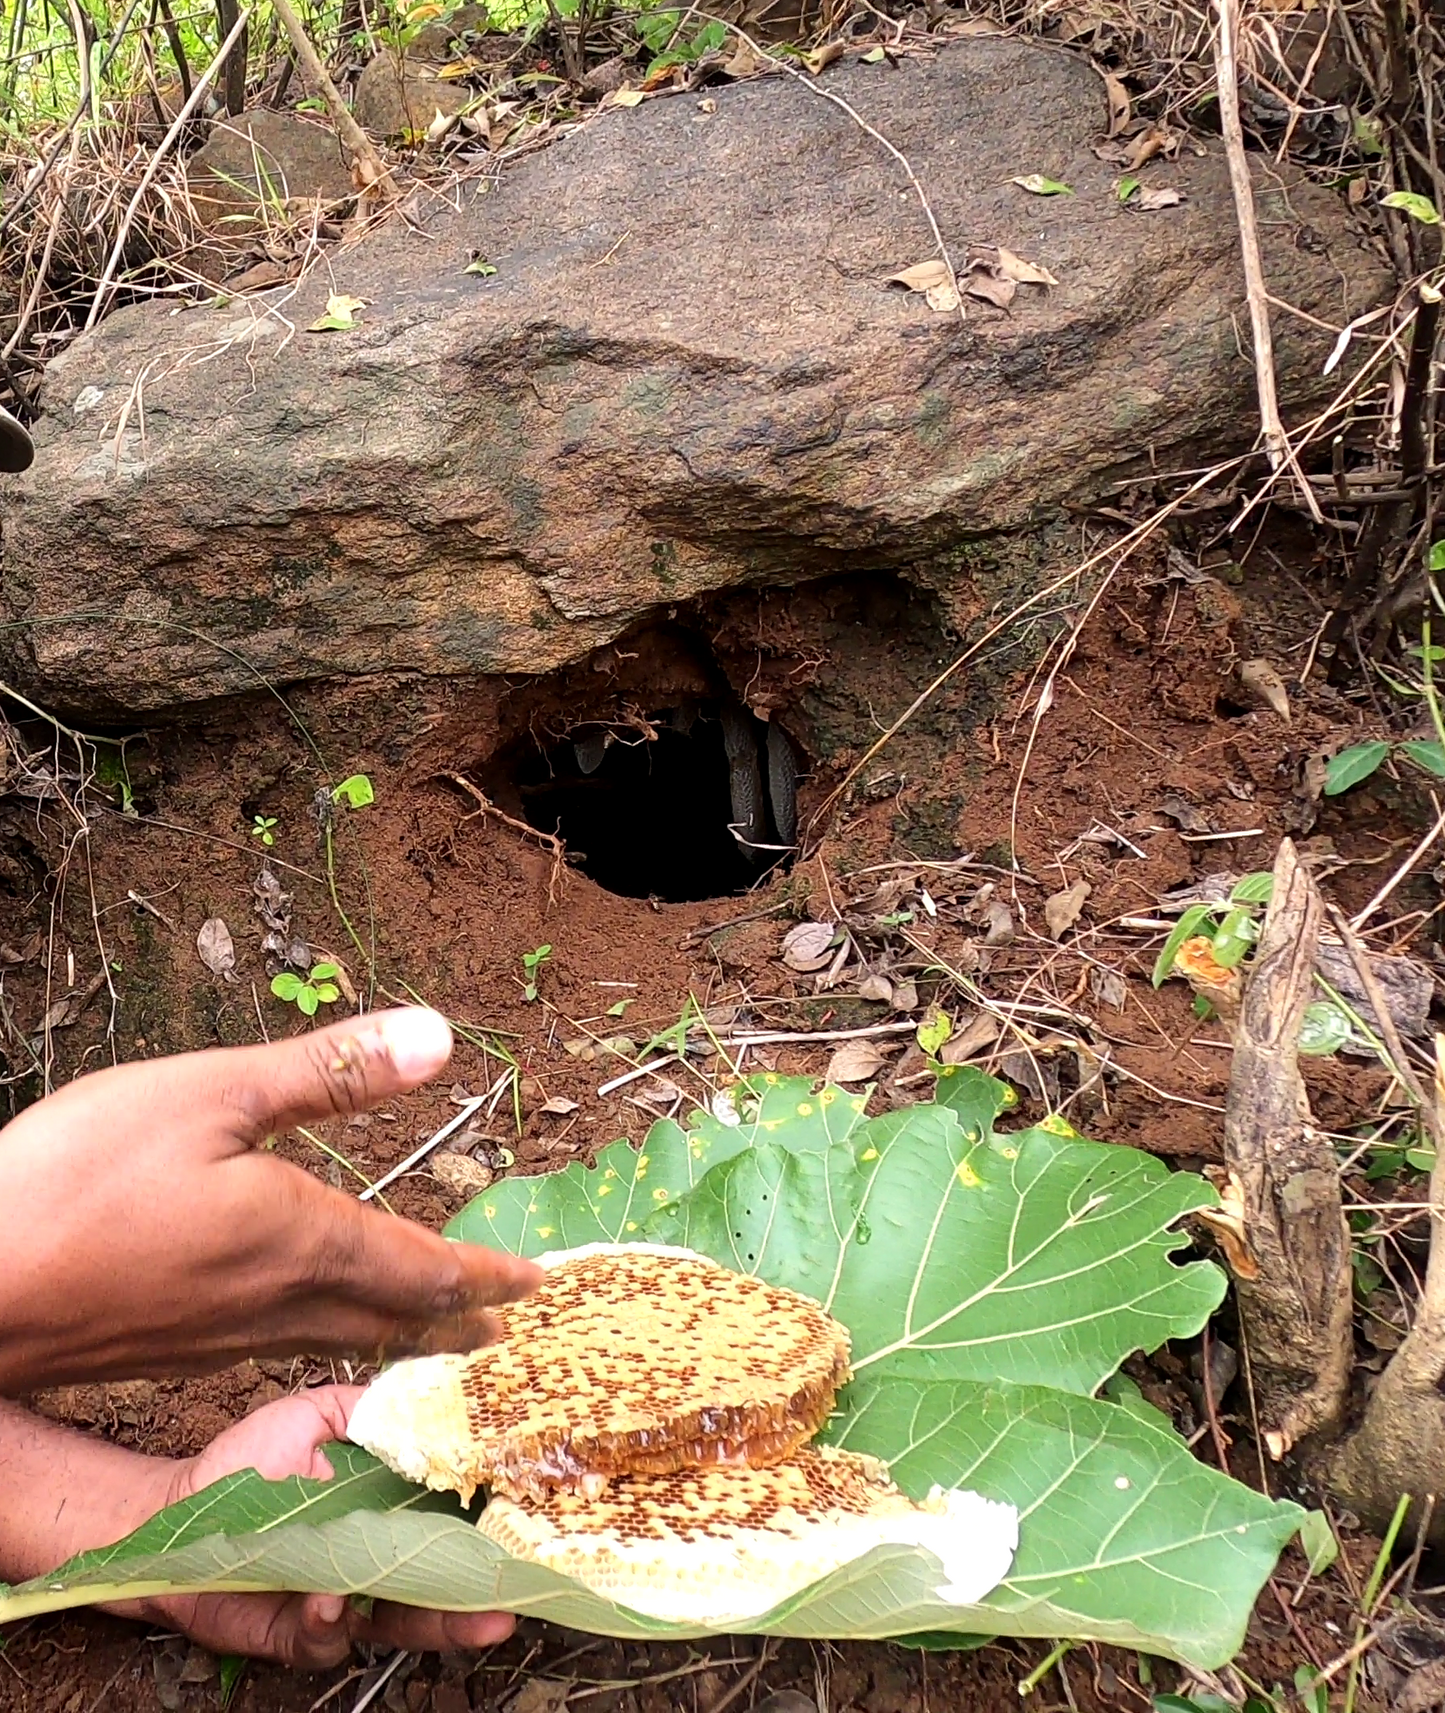 500 Grams - Burrow Honey From The Forests - Pondhu Thaen